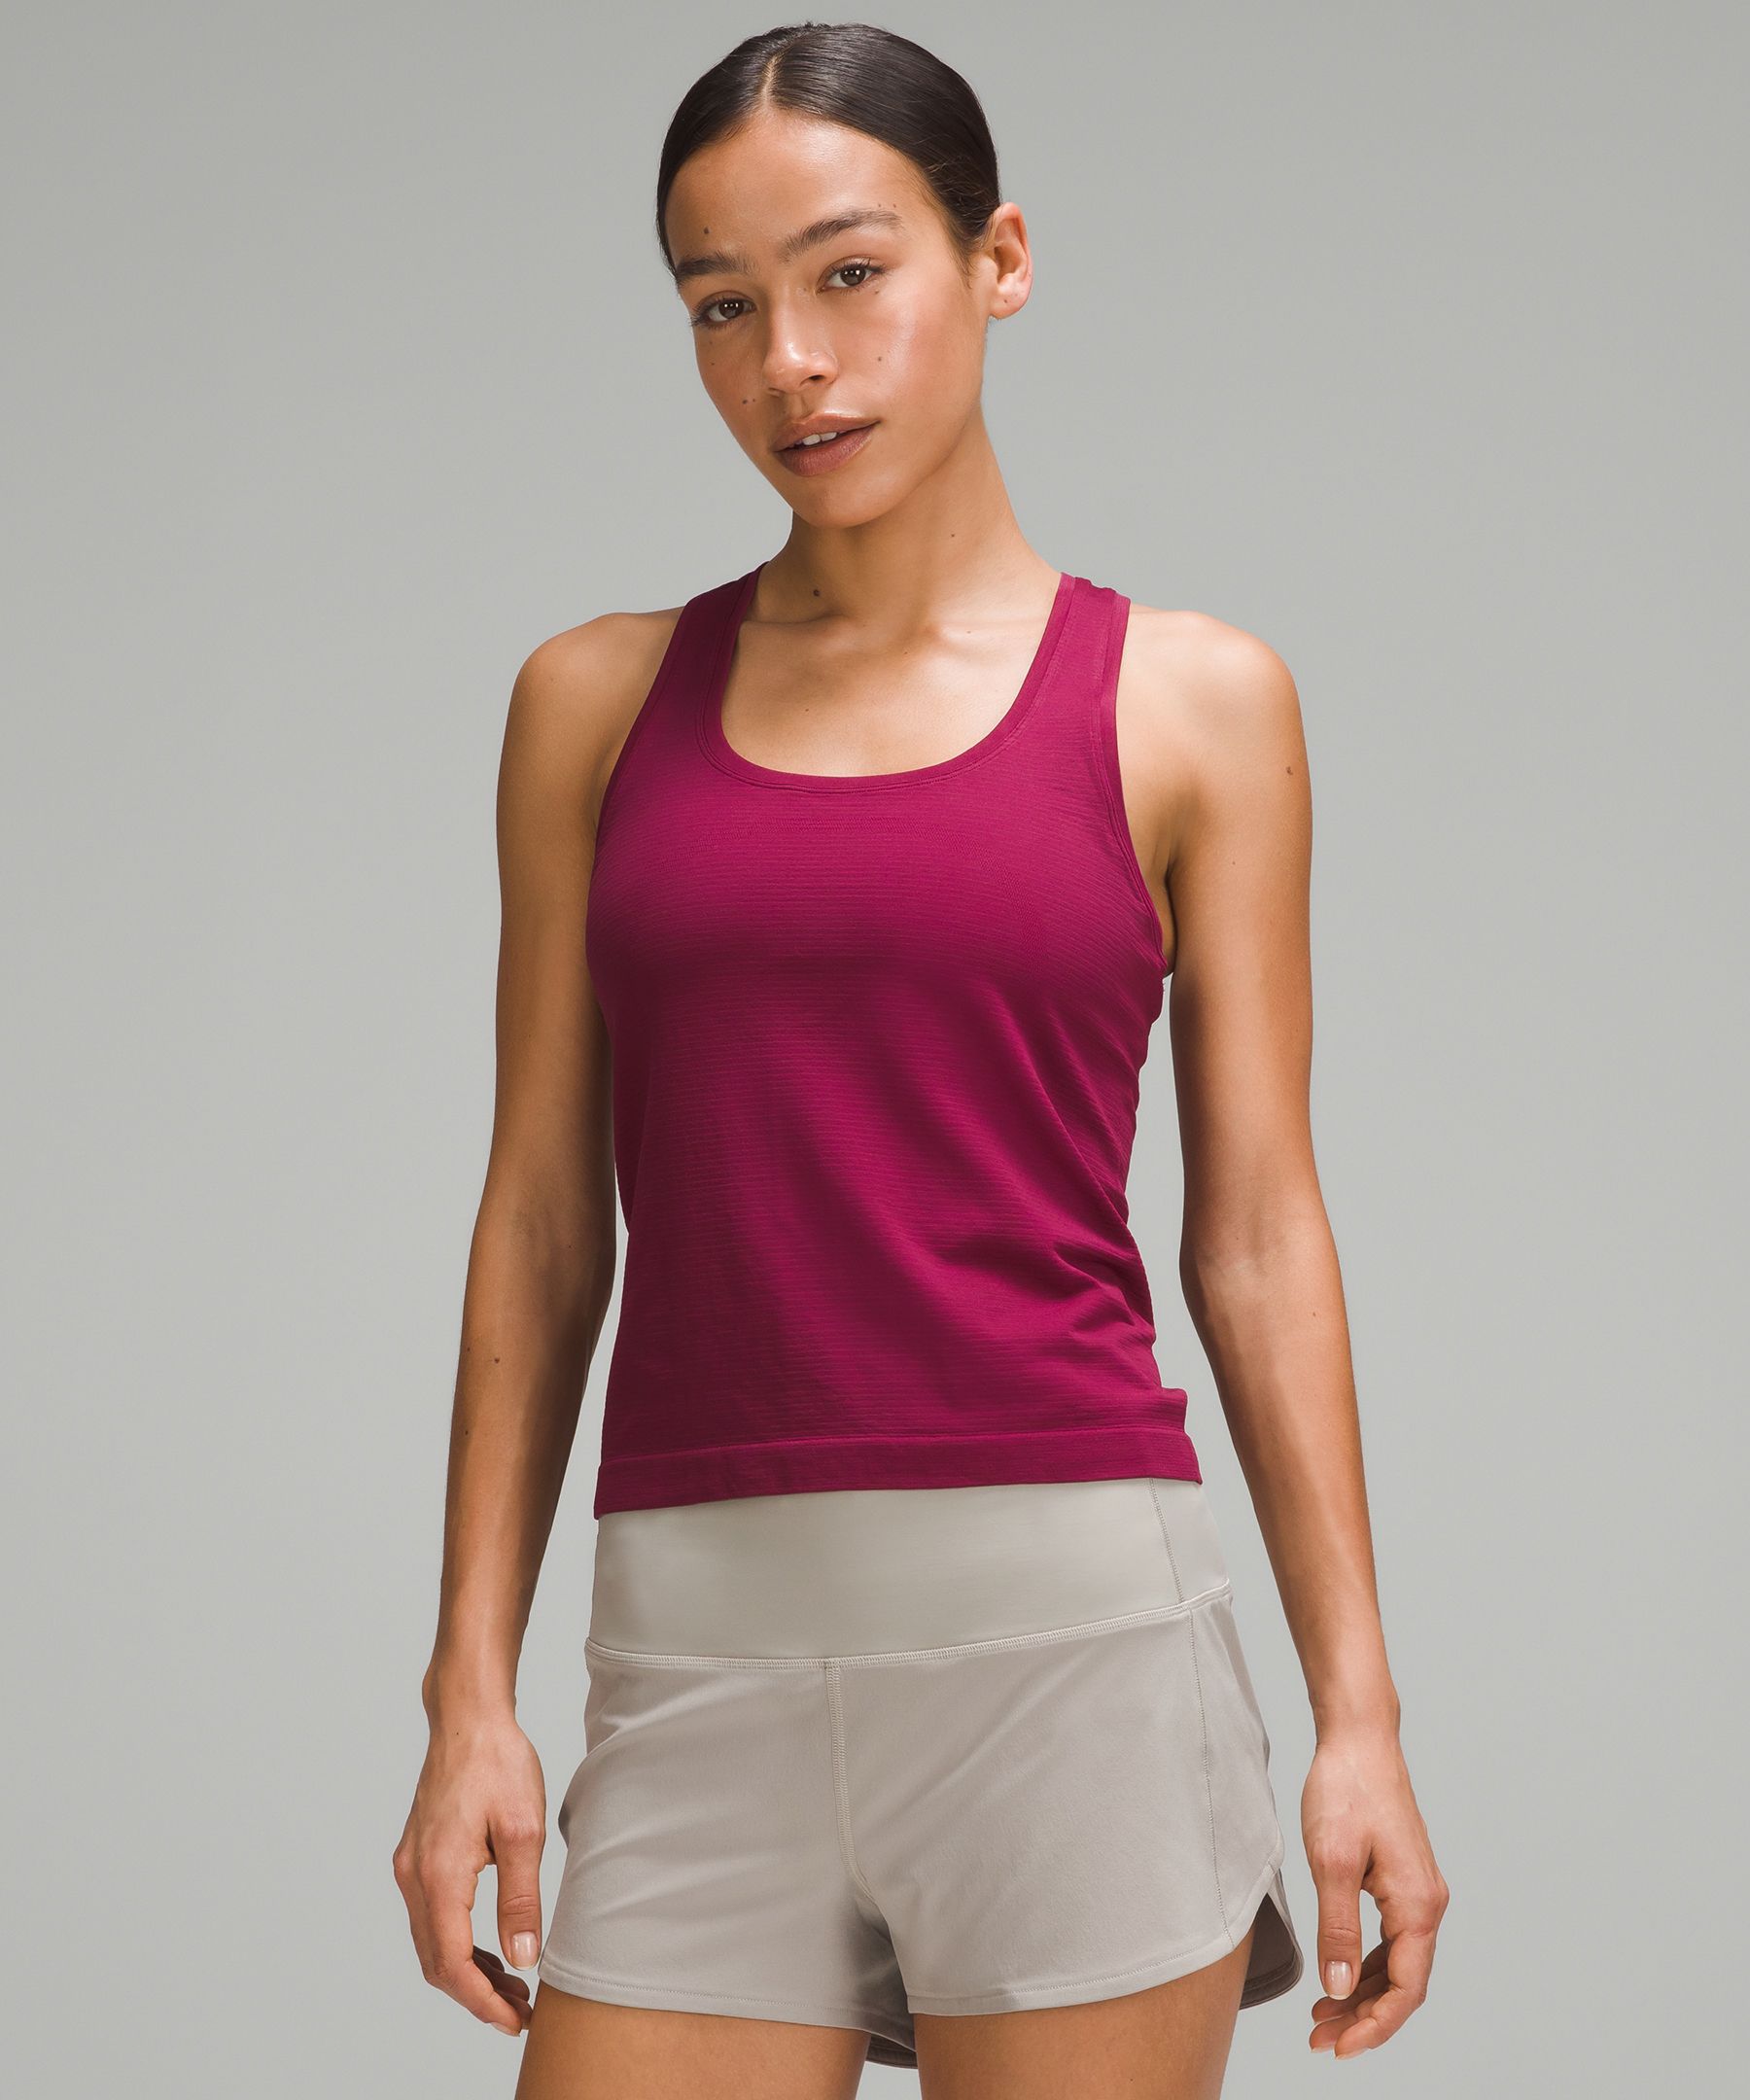 Get These $68 Lululemon Shorts for $39, a $58 Tank Top for $29 & More